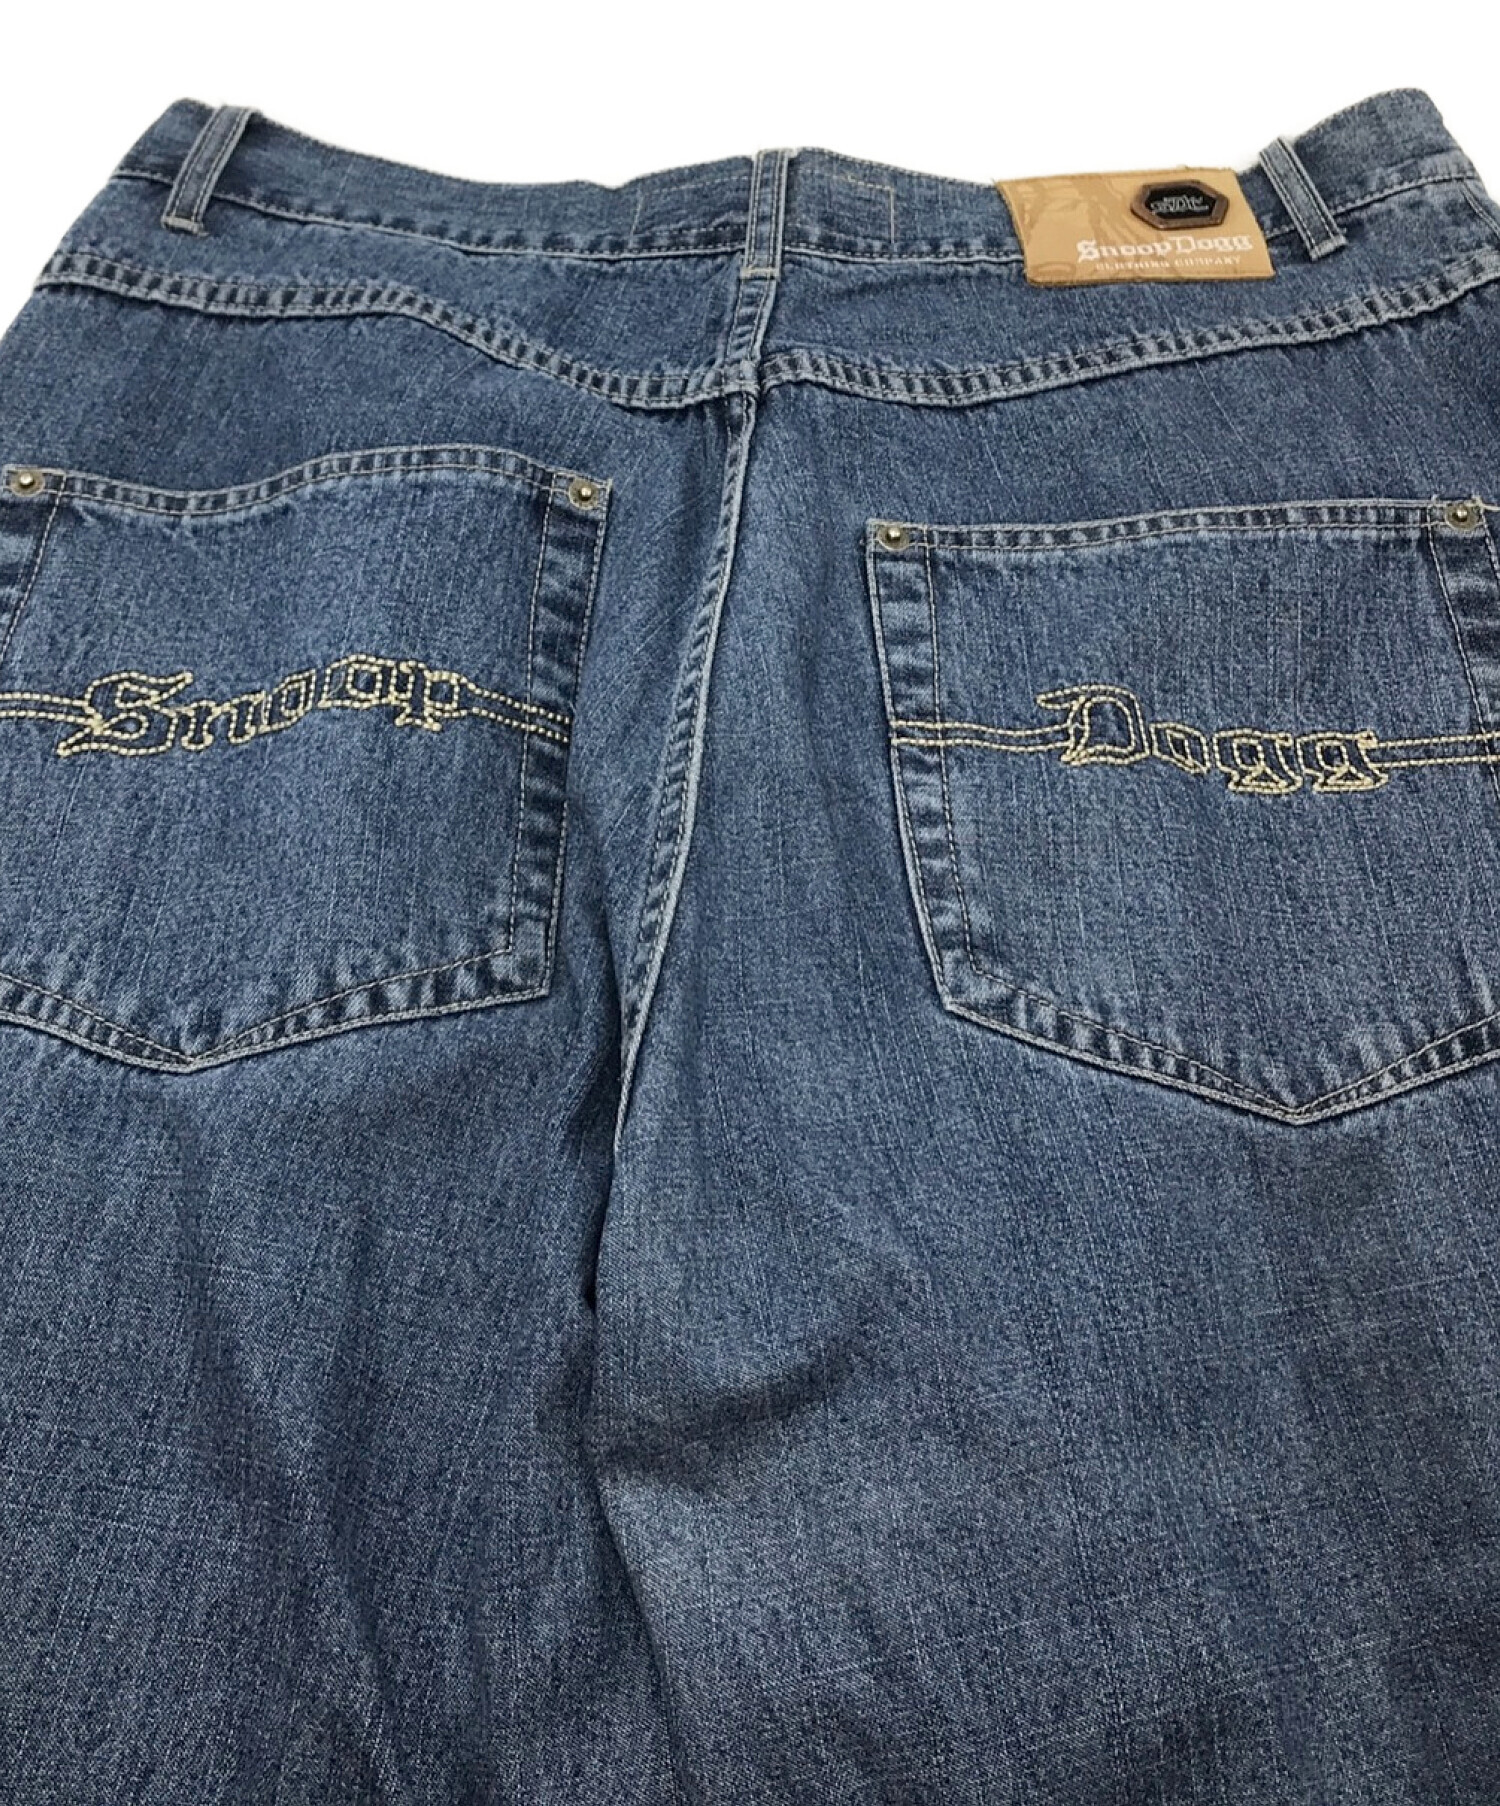 SNOOP DOG JEANS スヌープドッグジーンズ 90s VINTAGE